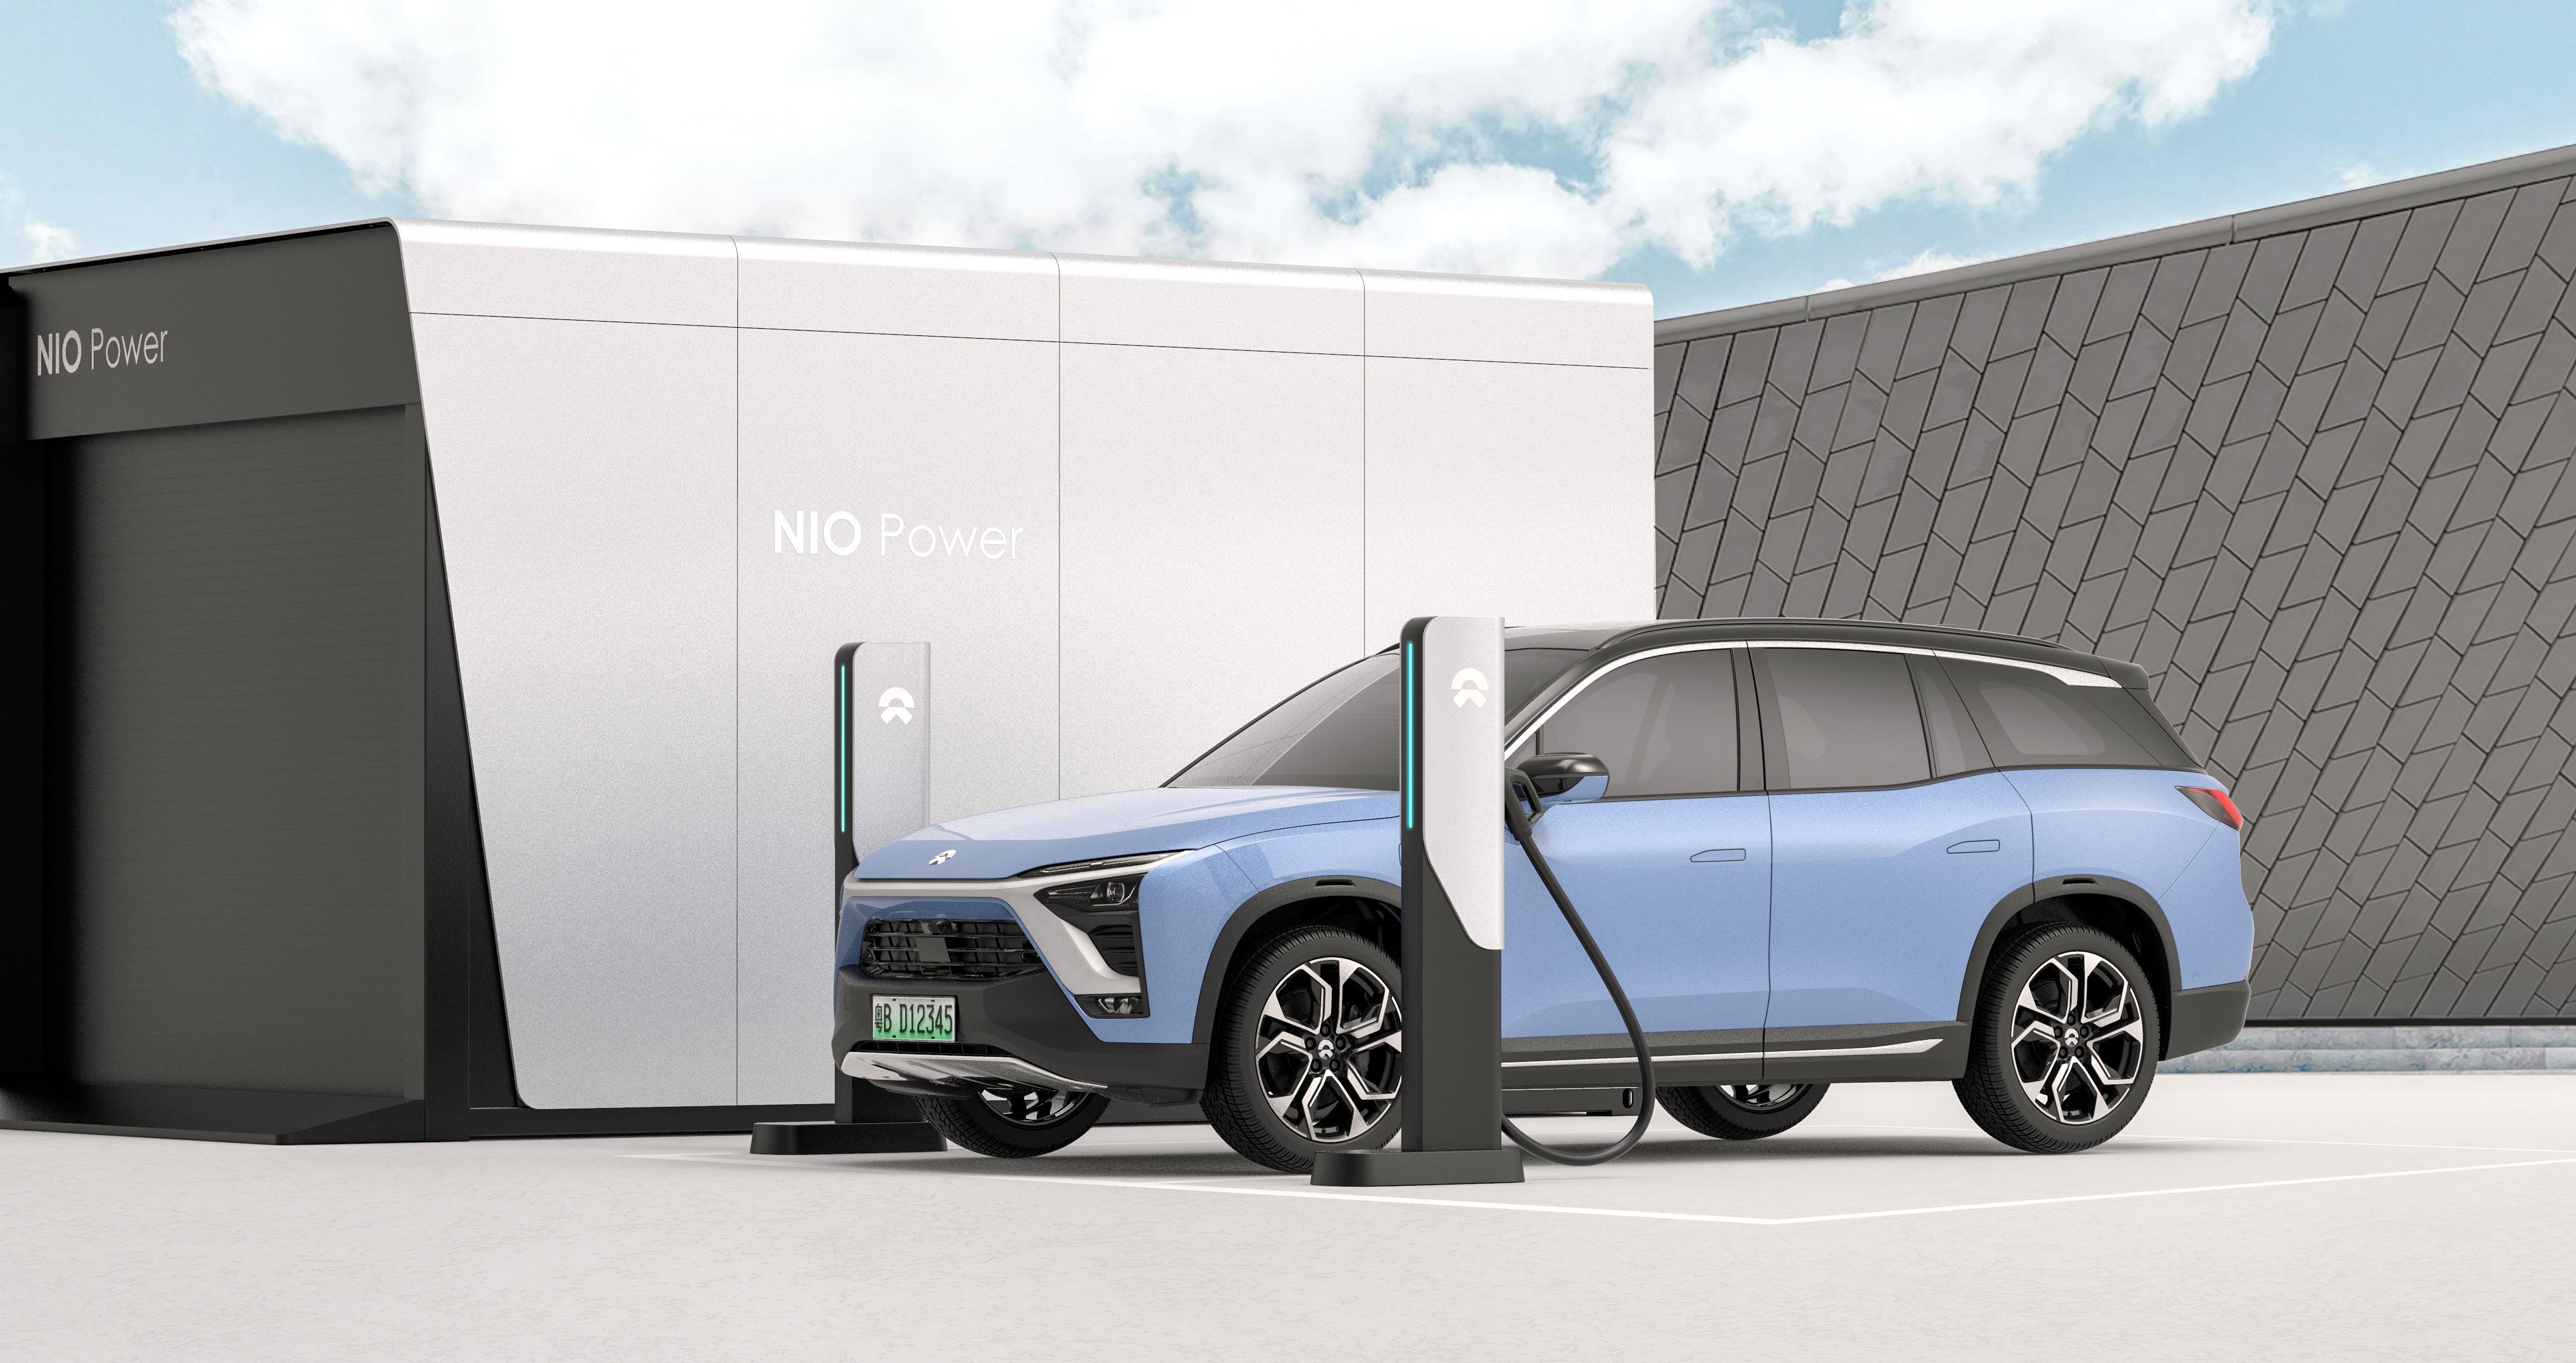 Nio shifts to lithium iron phosphate batteries, following Tesla and Xpeng